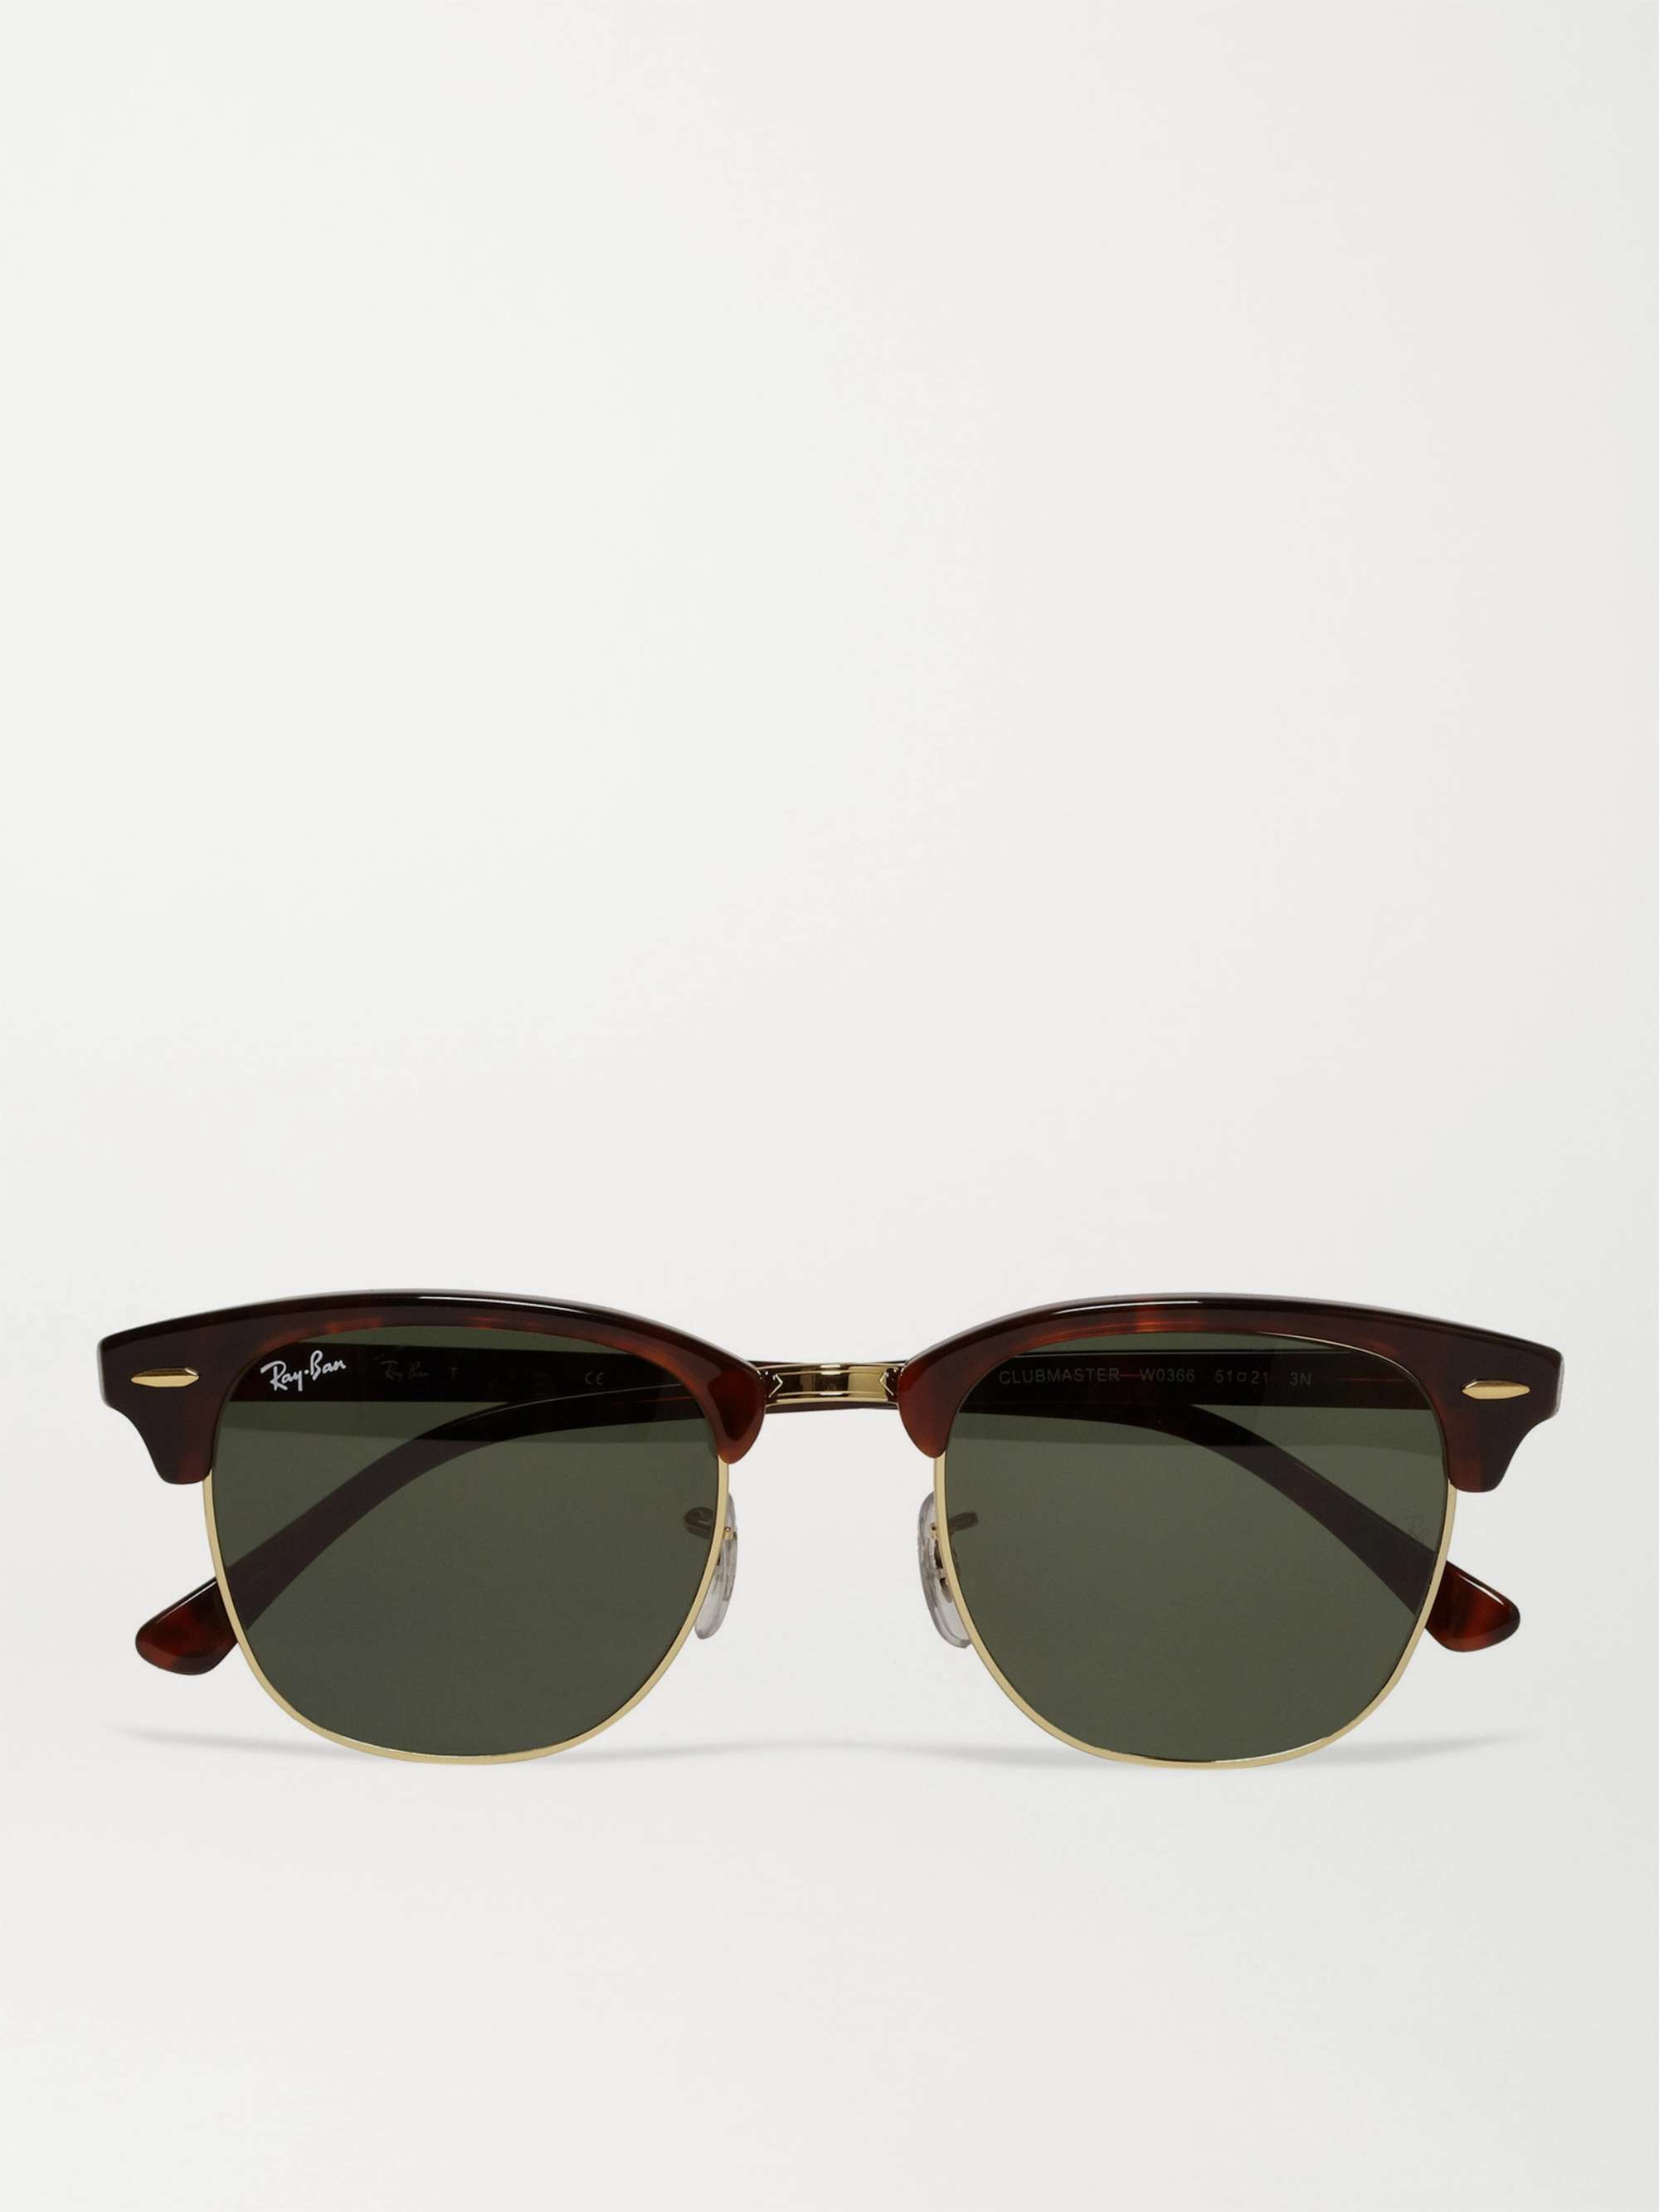 RAY-BAN Acetate and Gold-Tone Sunglasses | PORTER